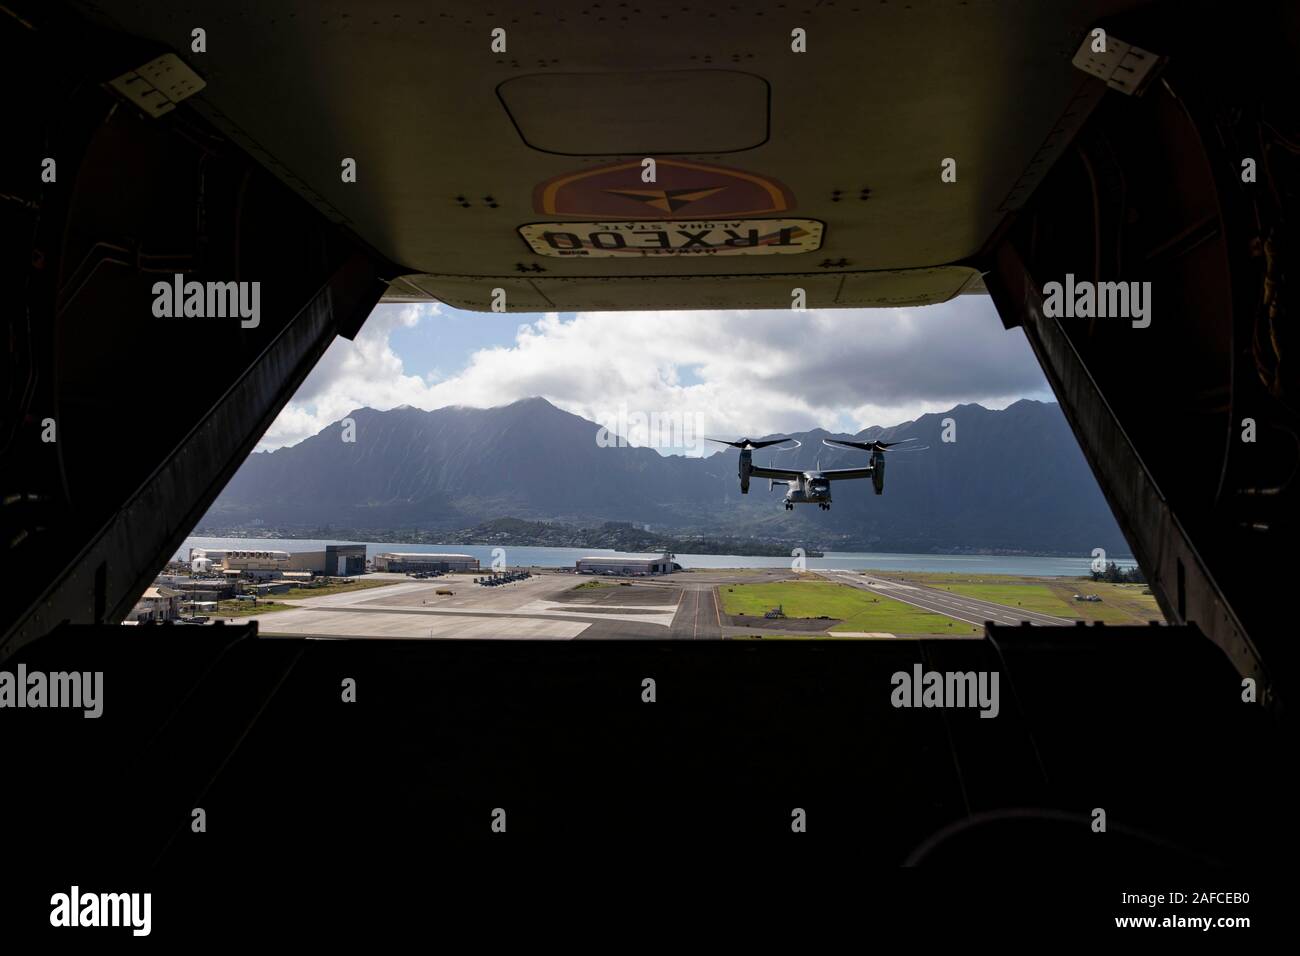 A U.S. Marine Corps MV-22B Osprey assigned to Marine Medium Tiltrotor Squadron (VMM) 268 takes off, Marine Corps Base Hawaii (MCBH), Dec. 11, 2019. Marines with Headquarters Battalion, MCBH executed 9-line transmissions, casualty response exercises, and casualty evacuations with the assistance of VMM-268 to increase readiness and fluidity. (U.S. Marine Corps photo by Lance Cpl. Samantha Sanchez) Stock Photo